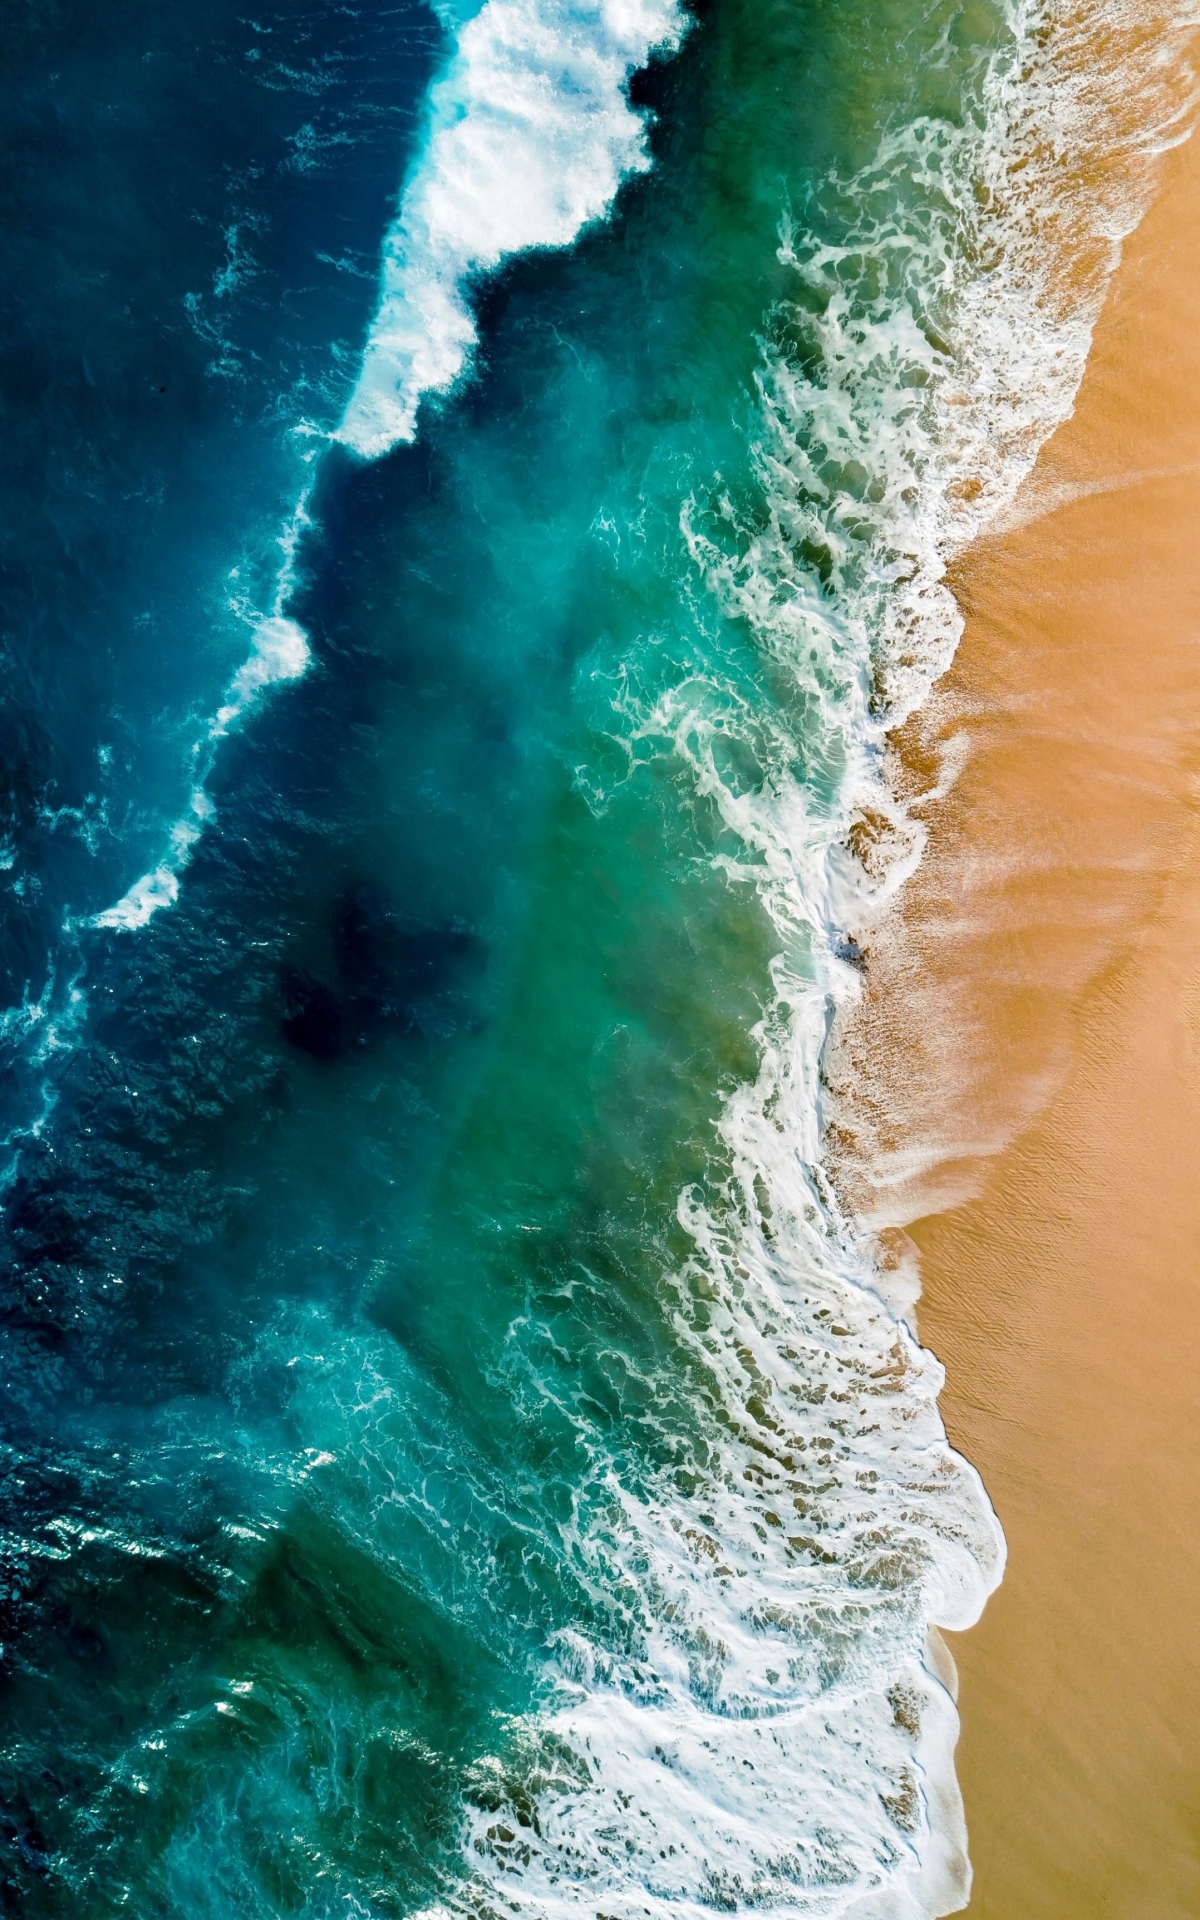 Iphone Sea Wallpapers